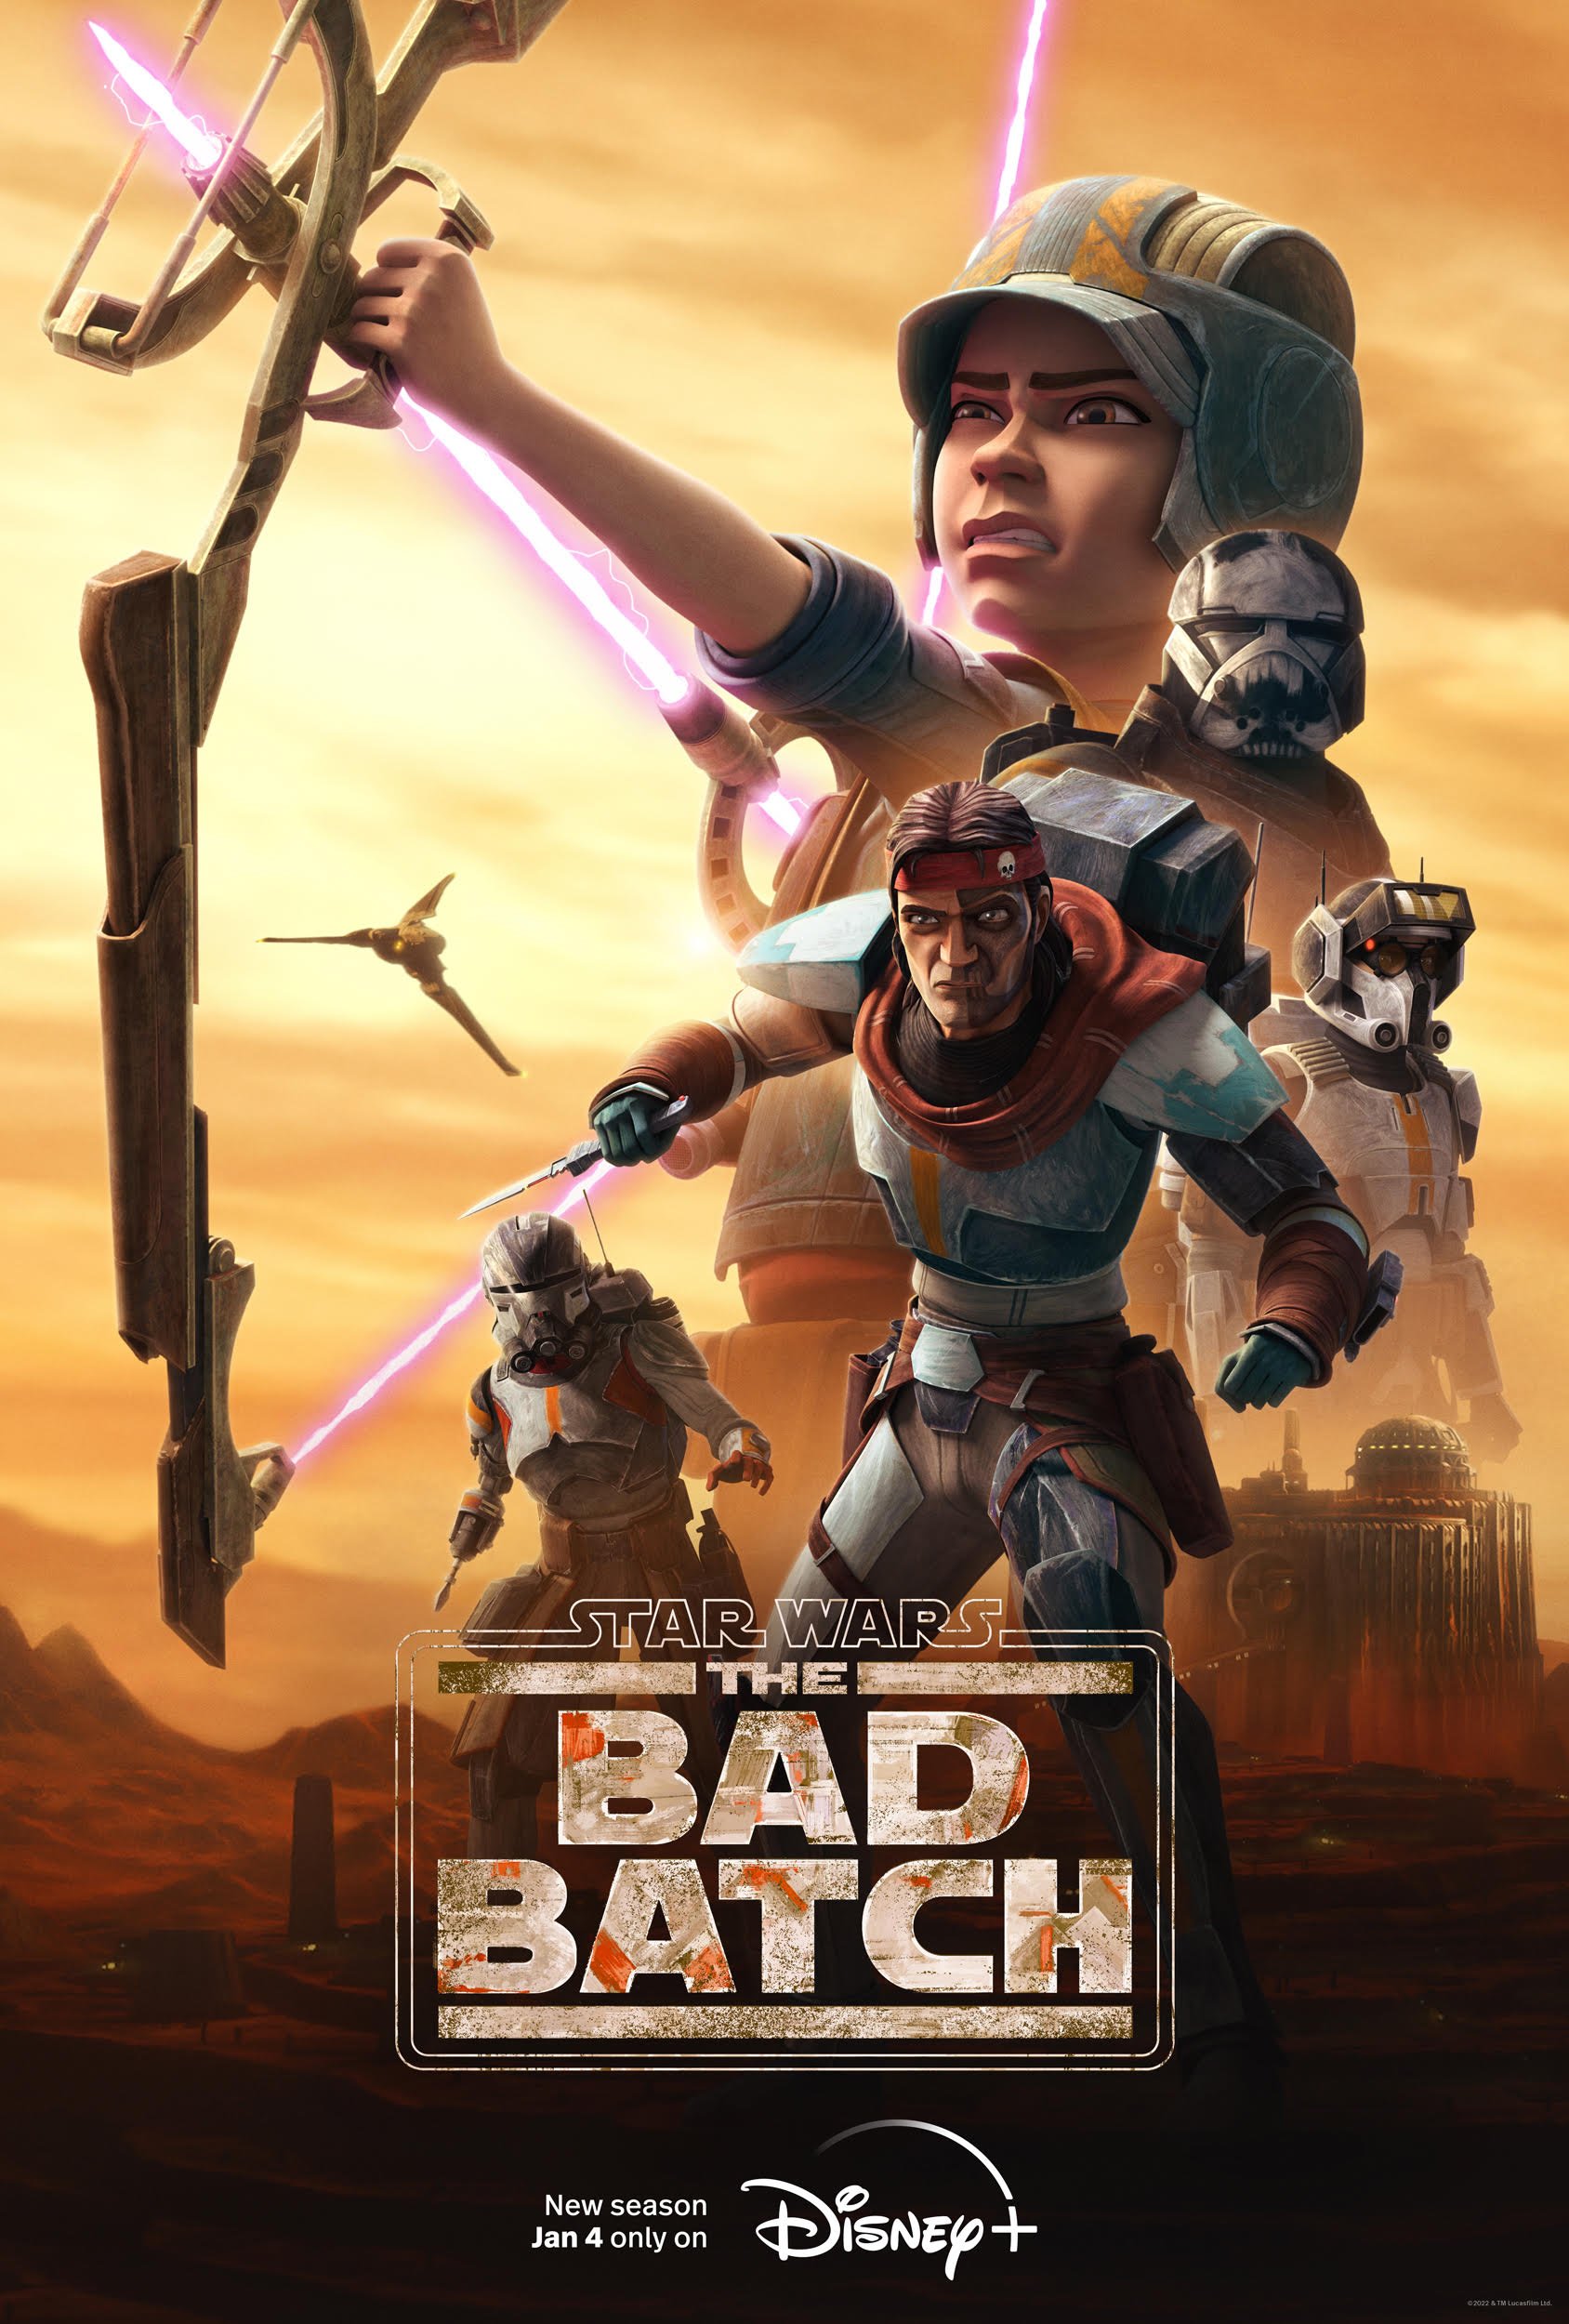 The Bad Batch' Season 2 Releases New Trailer and Poster One Month Ahead of Release, Episode Titles Revealed - Star Wars News Net